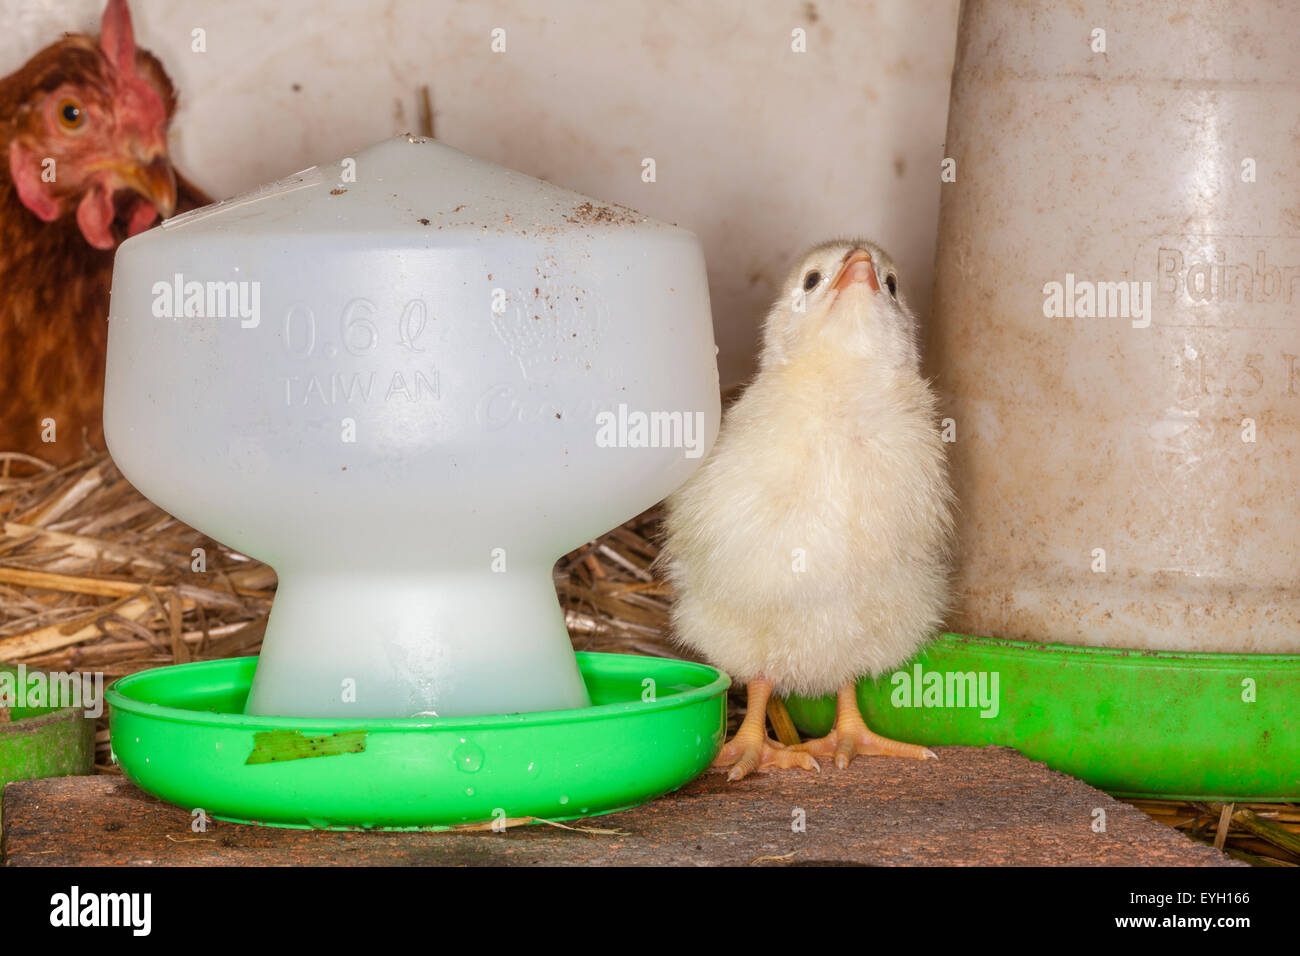 The bar is open, chick having a drink at the water dispenser Stock Photo